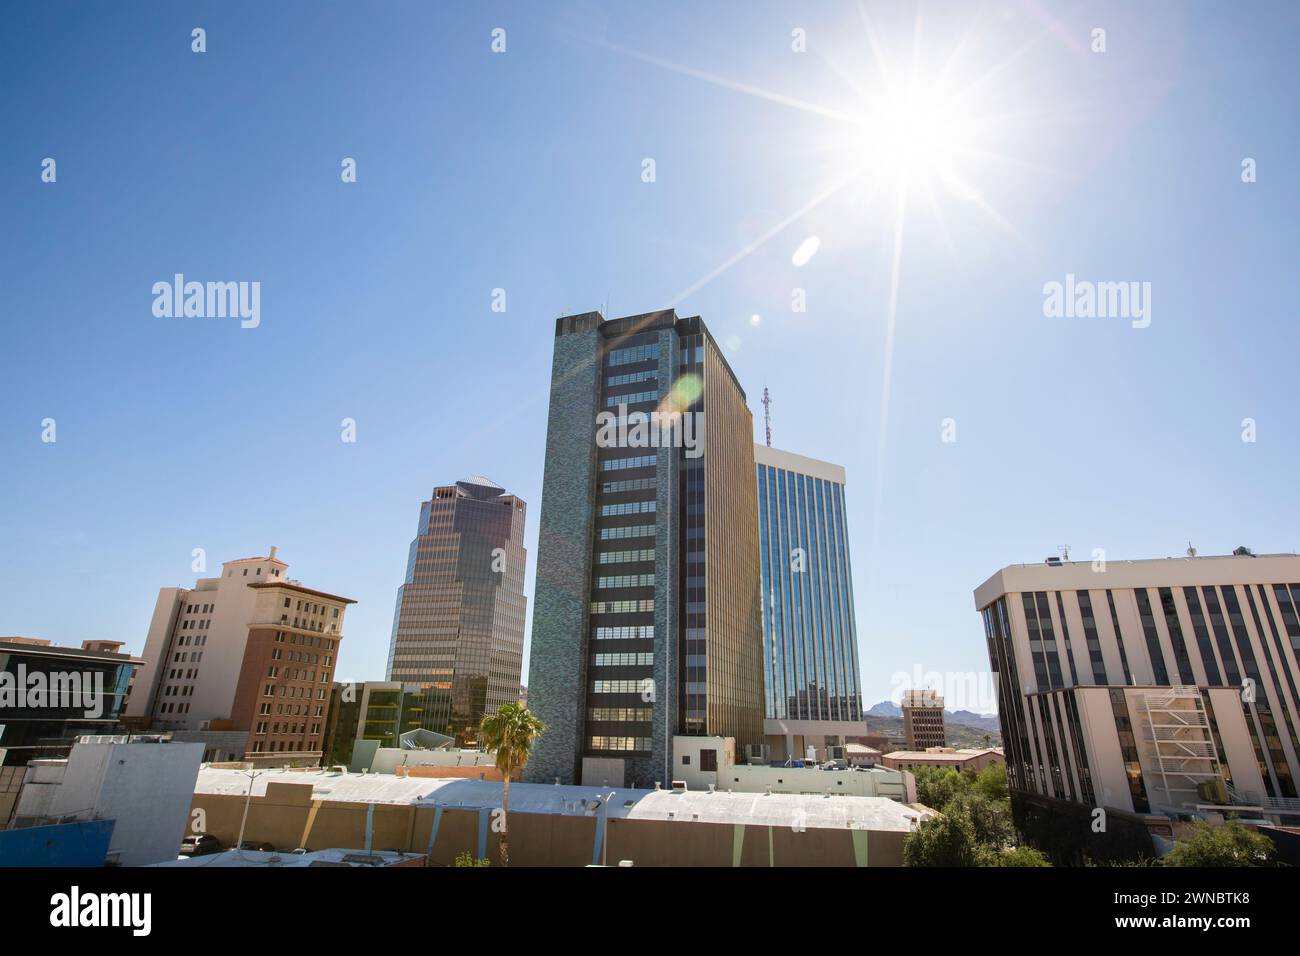 Summer afternoon view of the skyscrapers of downtown Tucson, Arizona, USA. Stock Photo